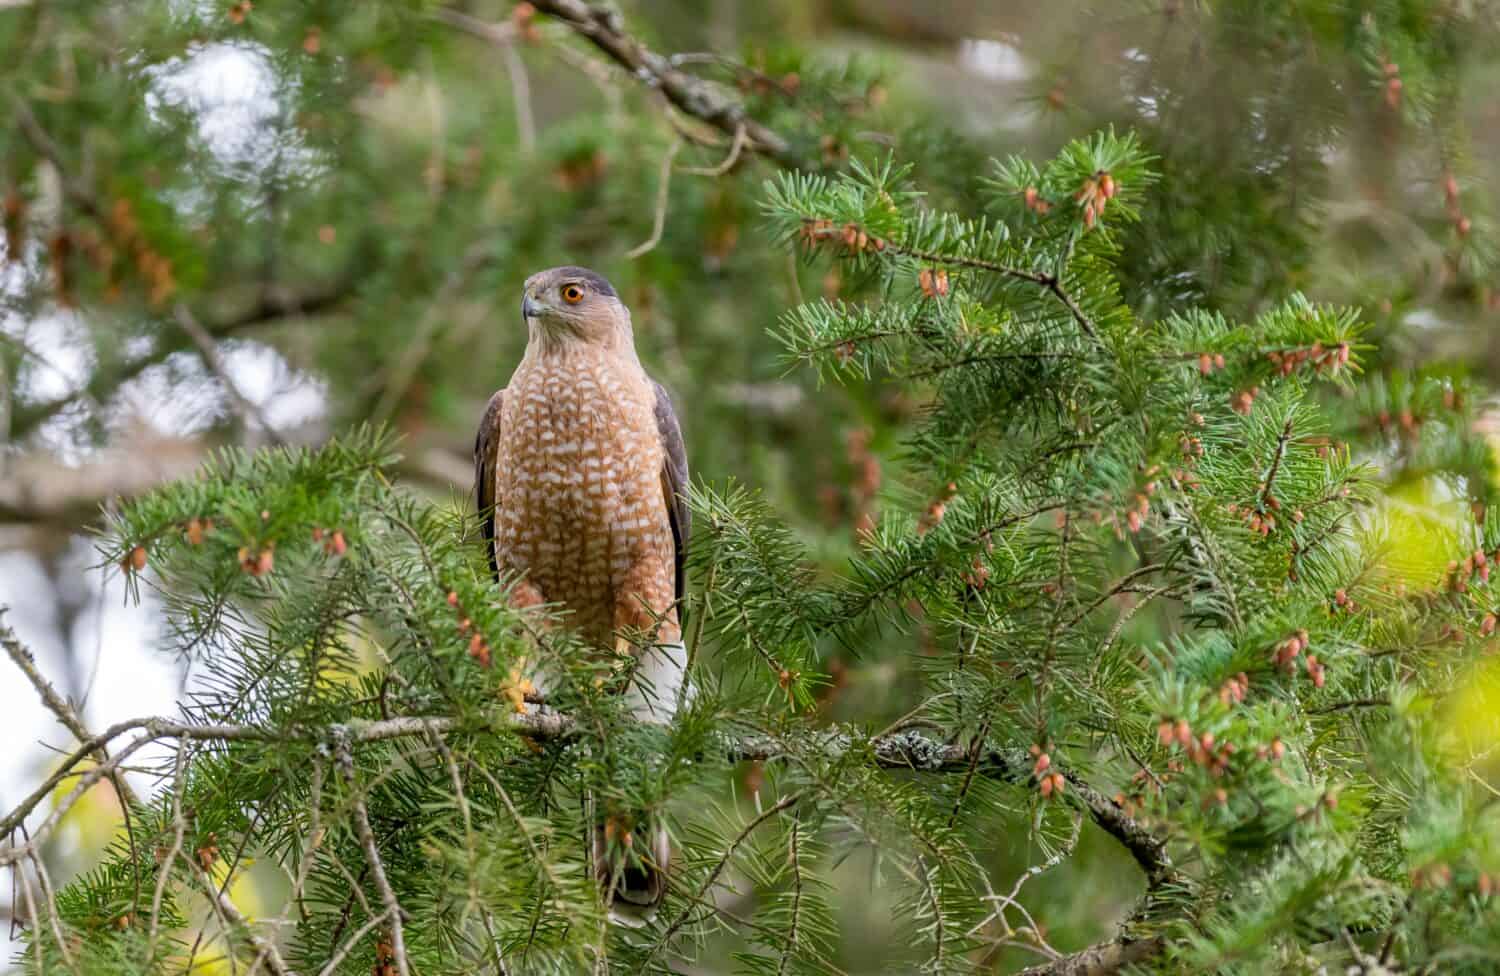 A male Cooper's hawk " Accipitridae cooperii " perched in a tree looking for prey.